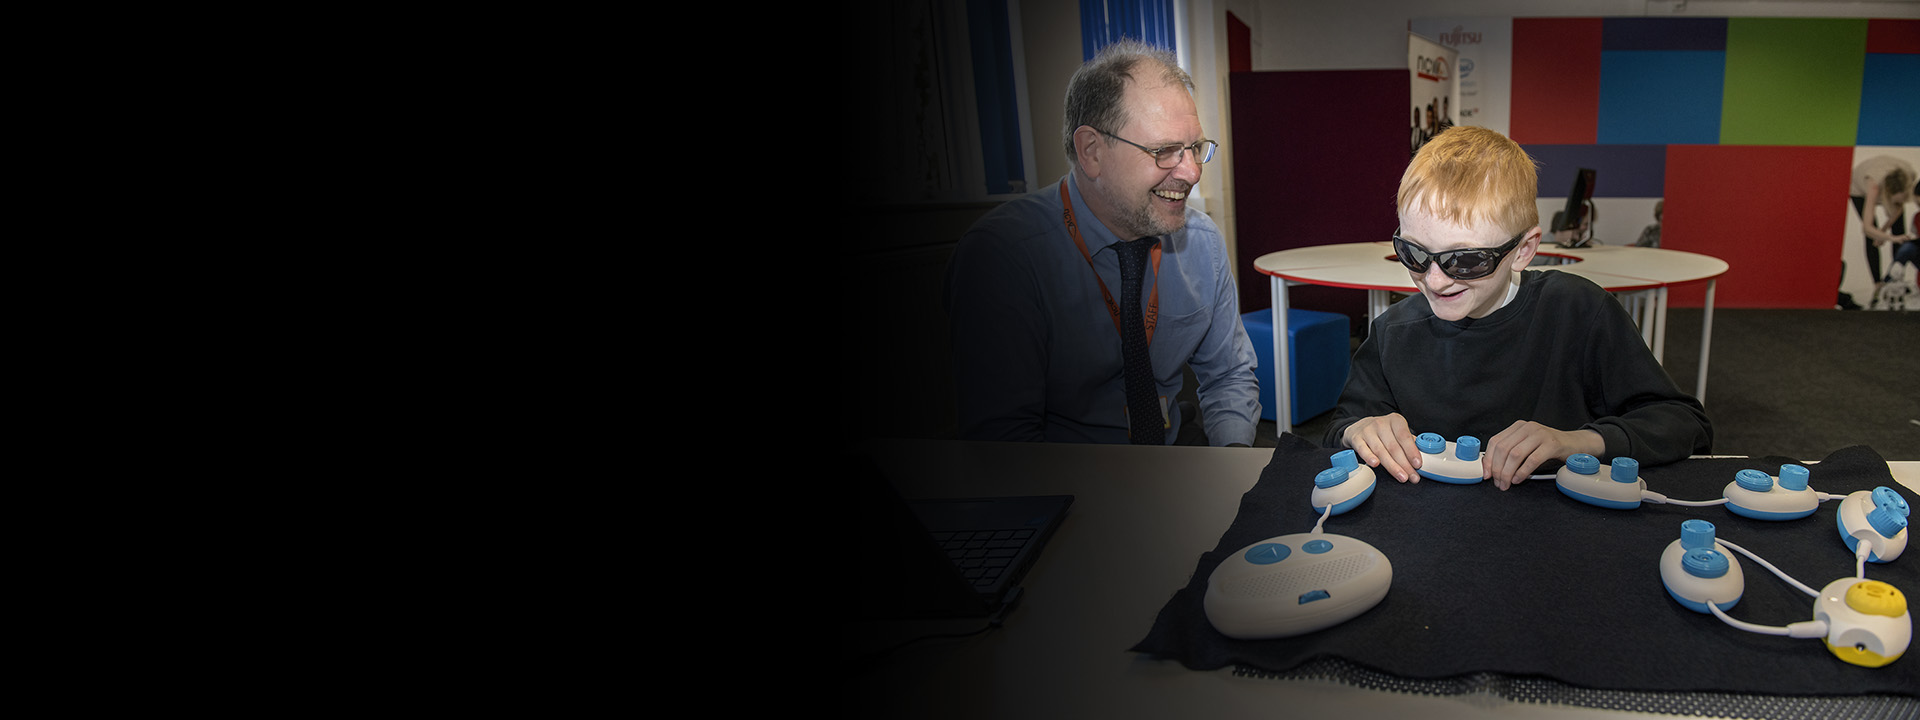 Young blind person learning to code tactilely using Code Jumper pods as teacher looks on. Photo by Jonathan Banks.